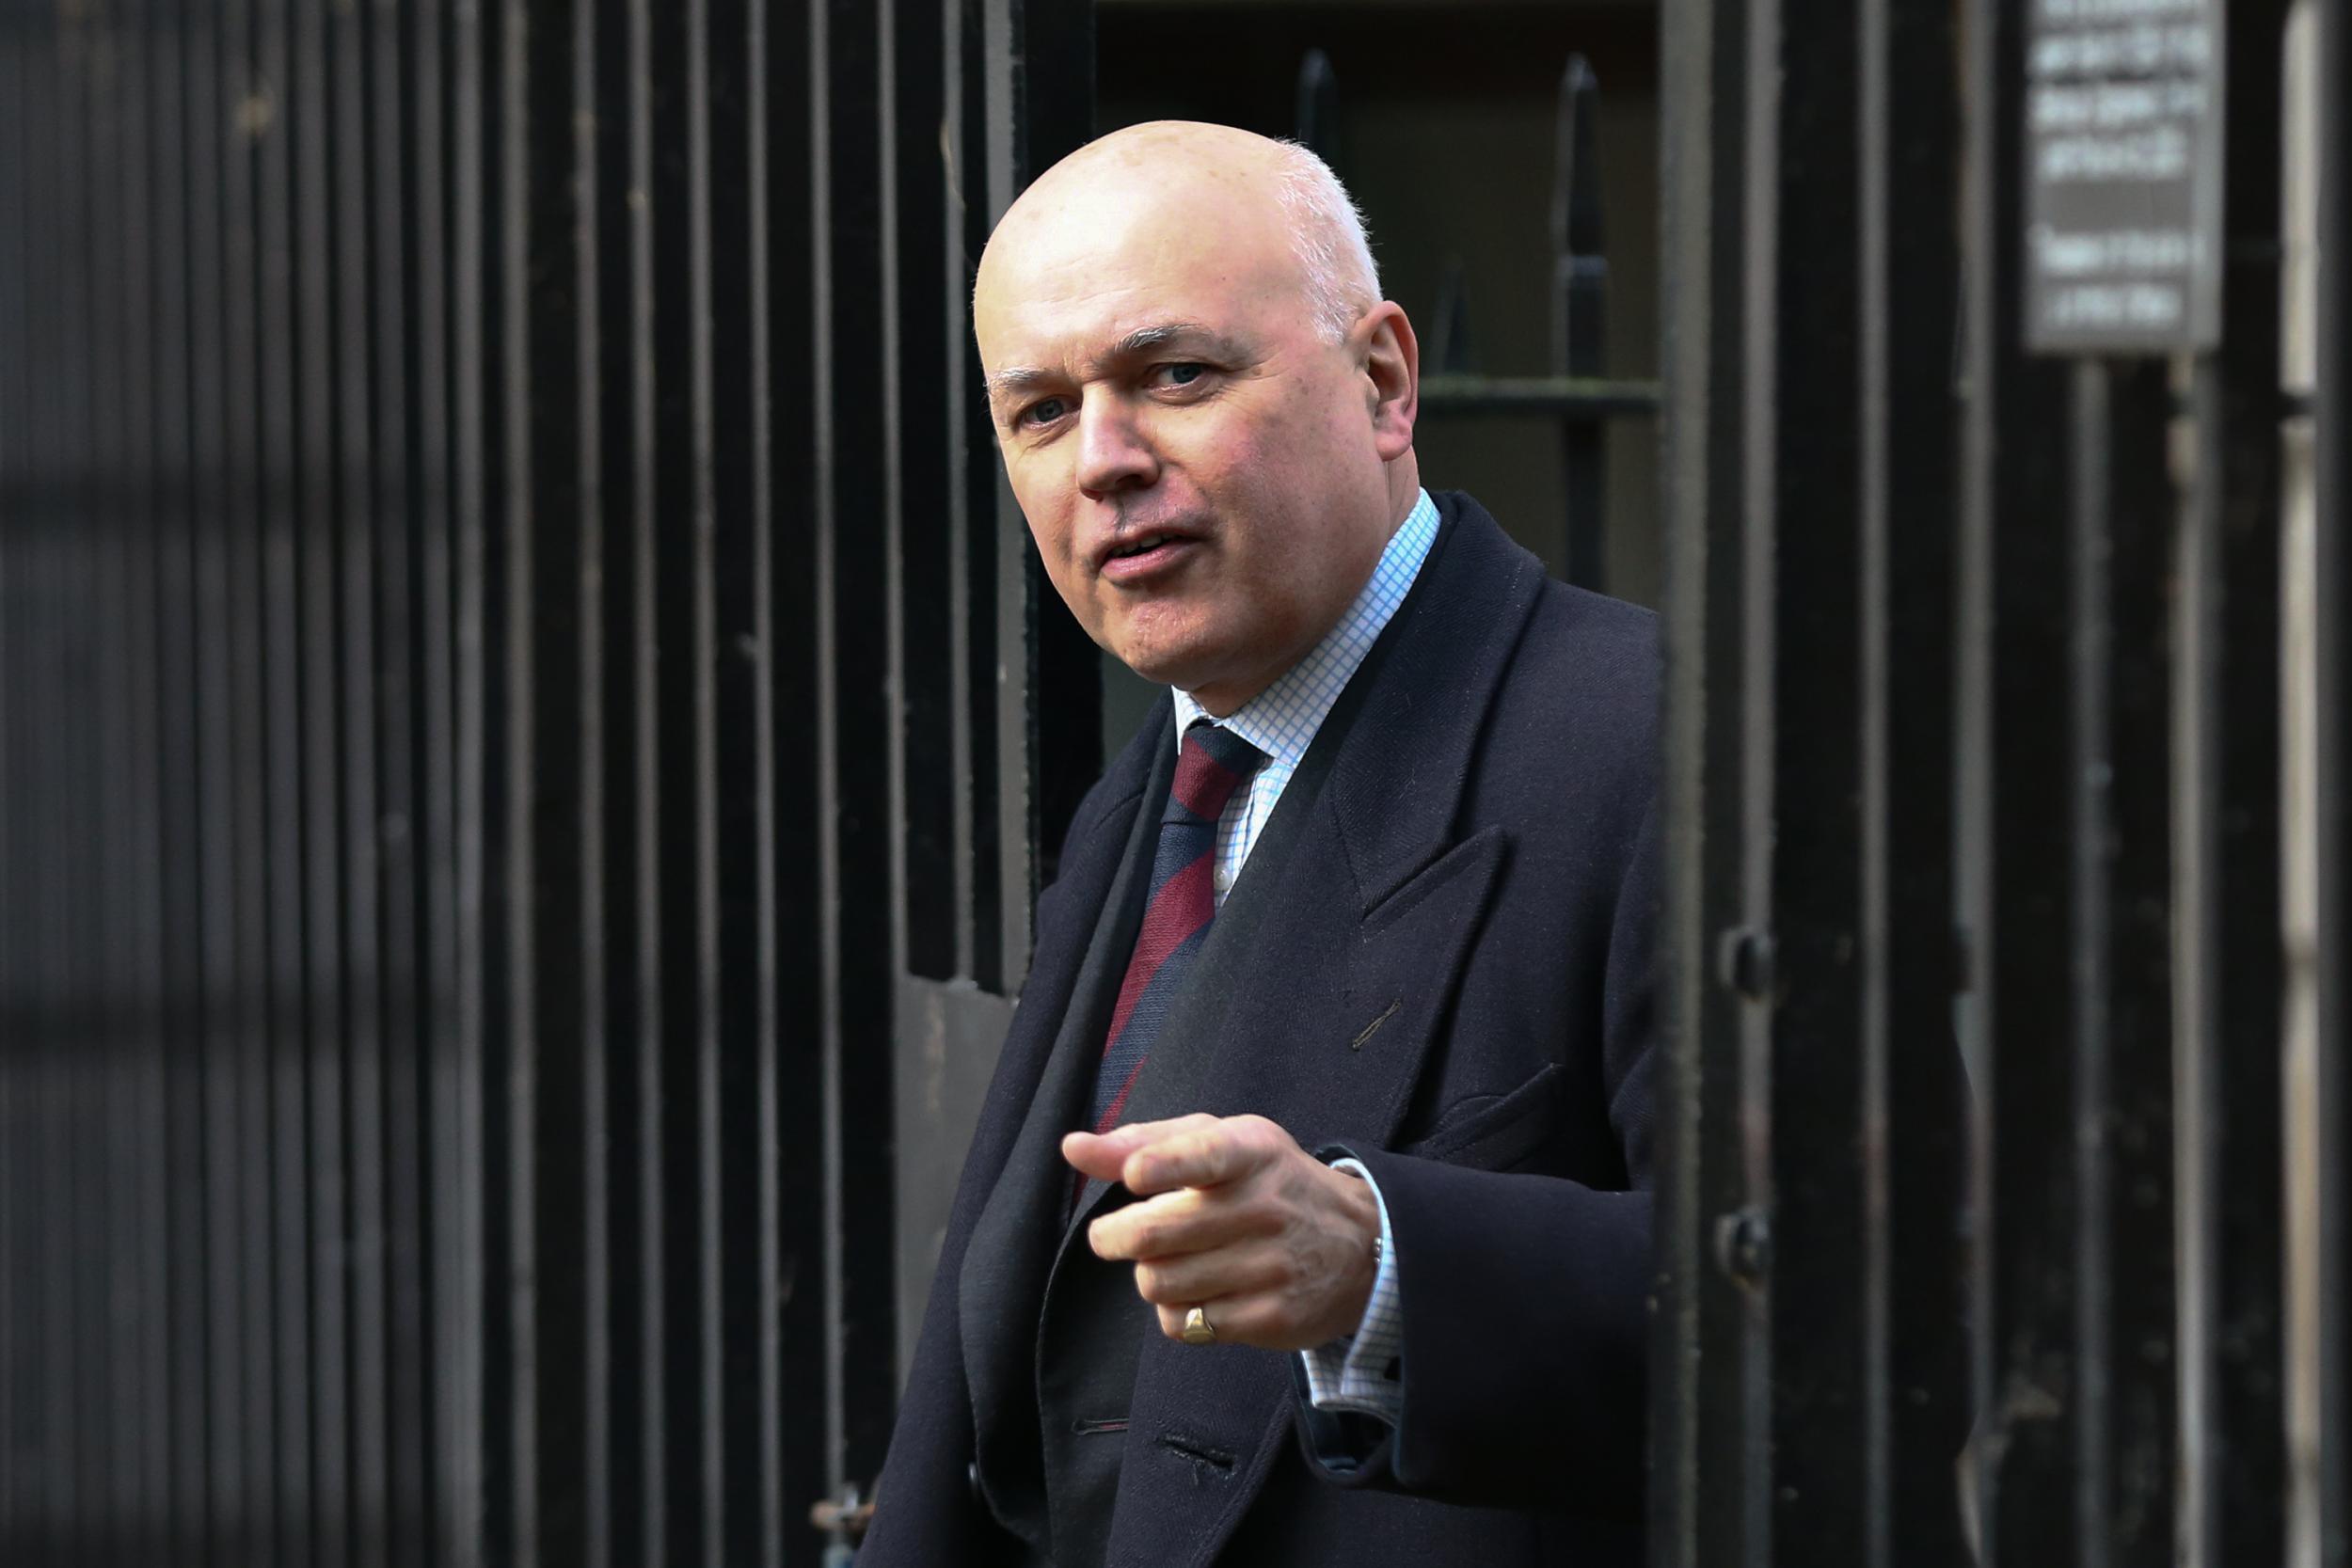 Iain Duncan Smith says the cuts will actually help disabled people